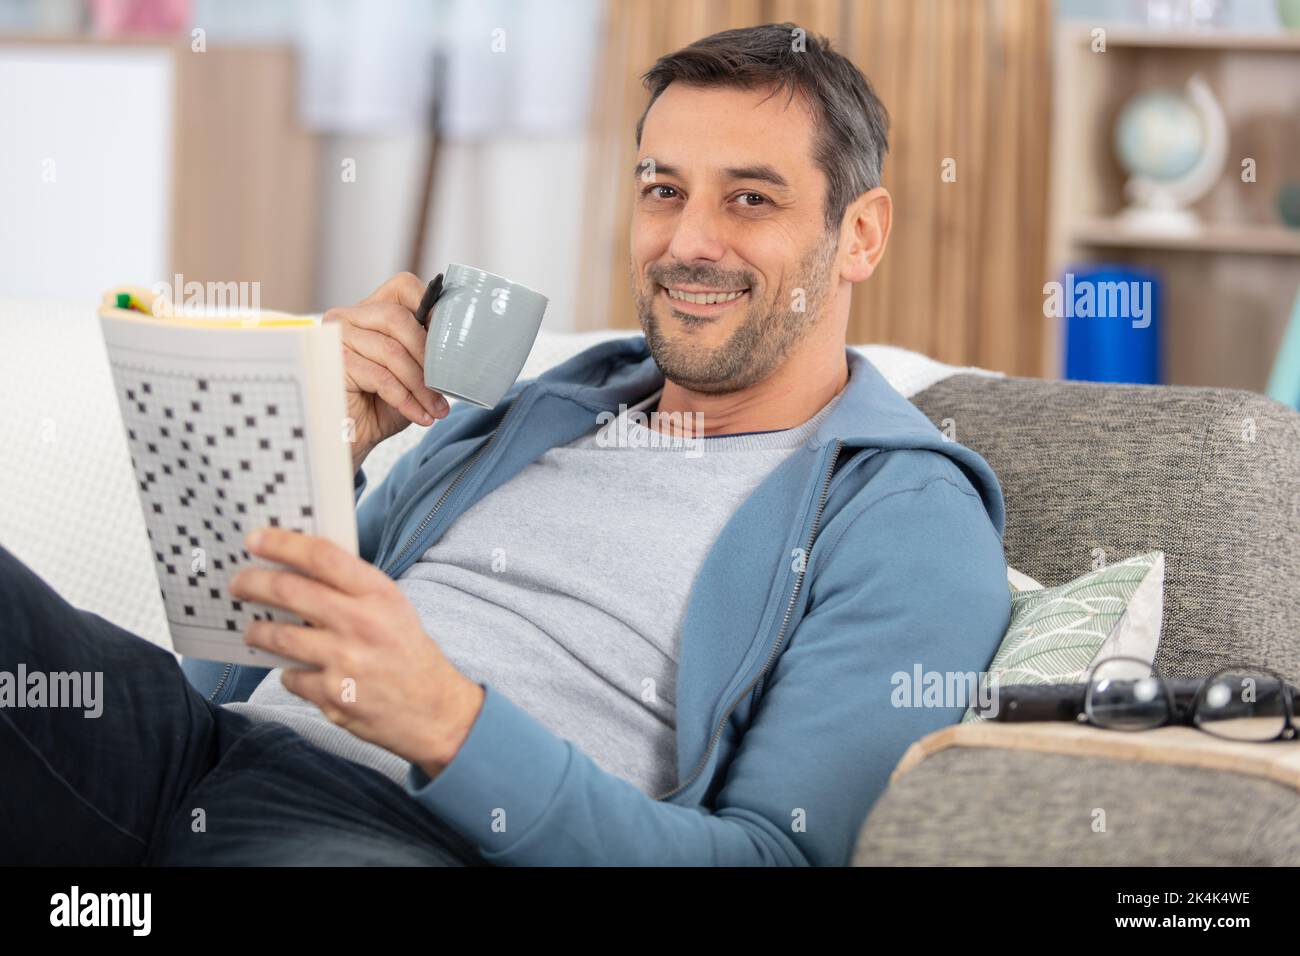 man is reading a magazine holding a cup of coffee Stock Photo